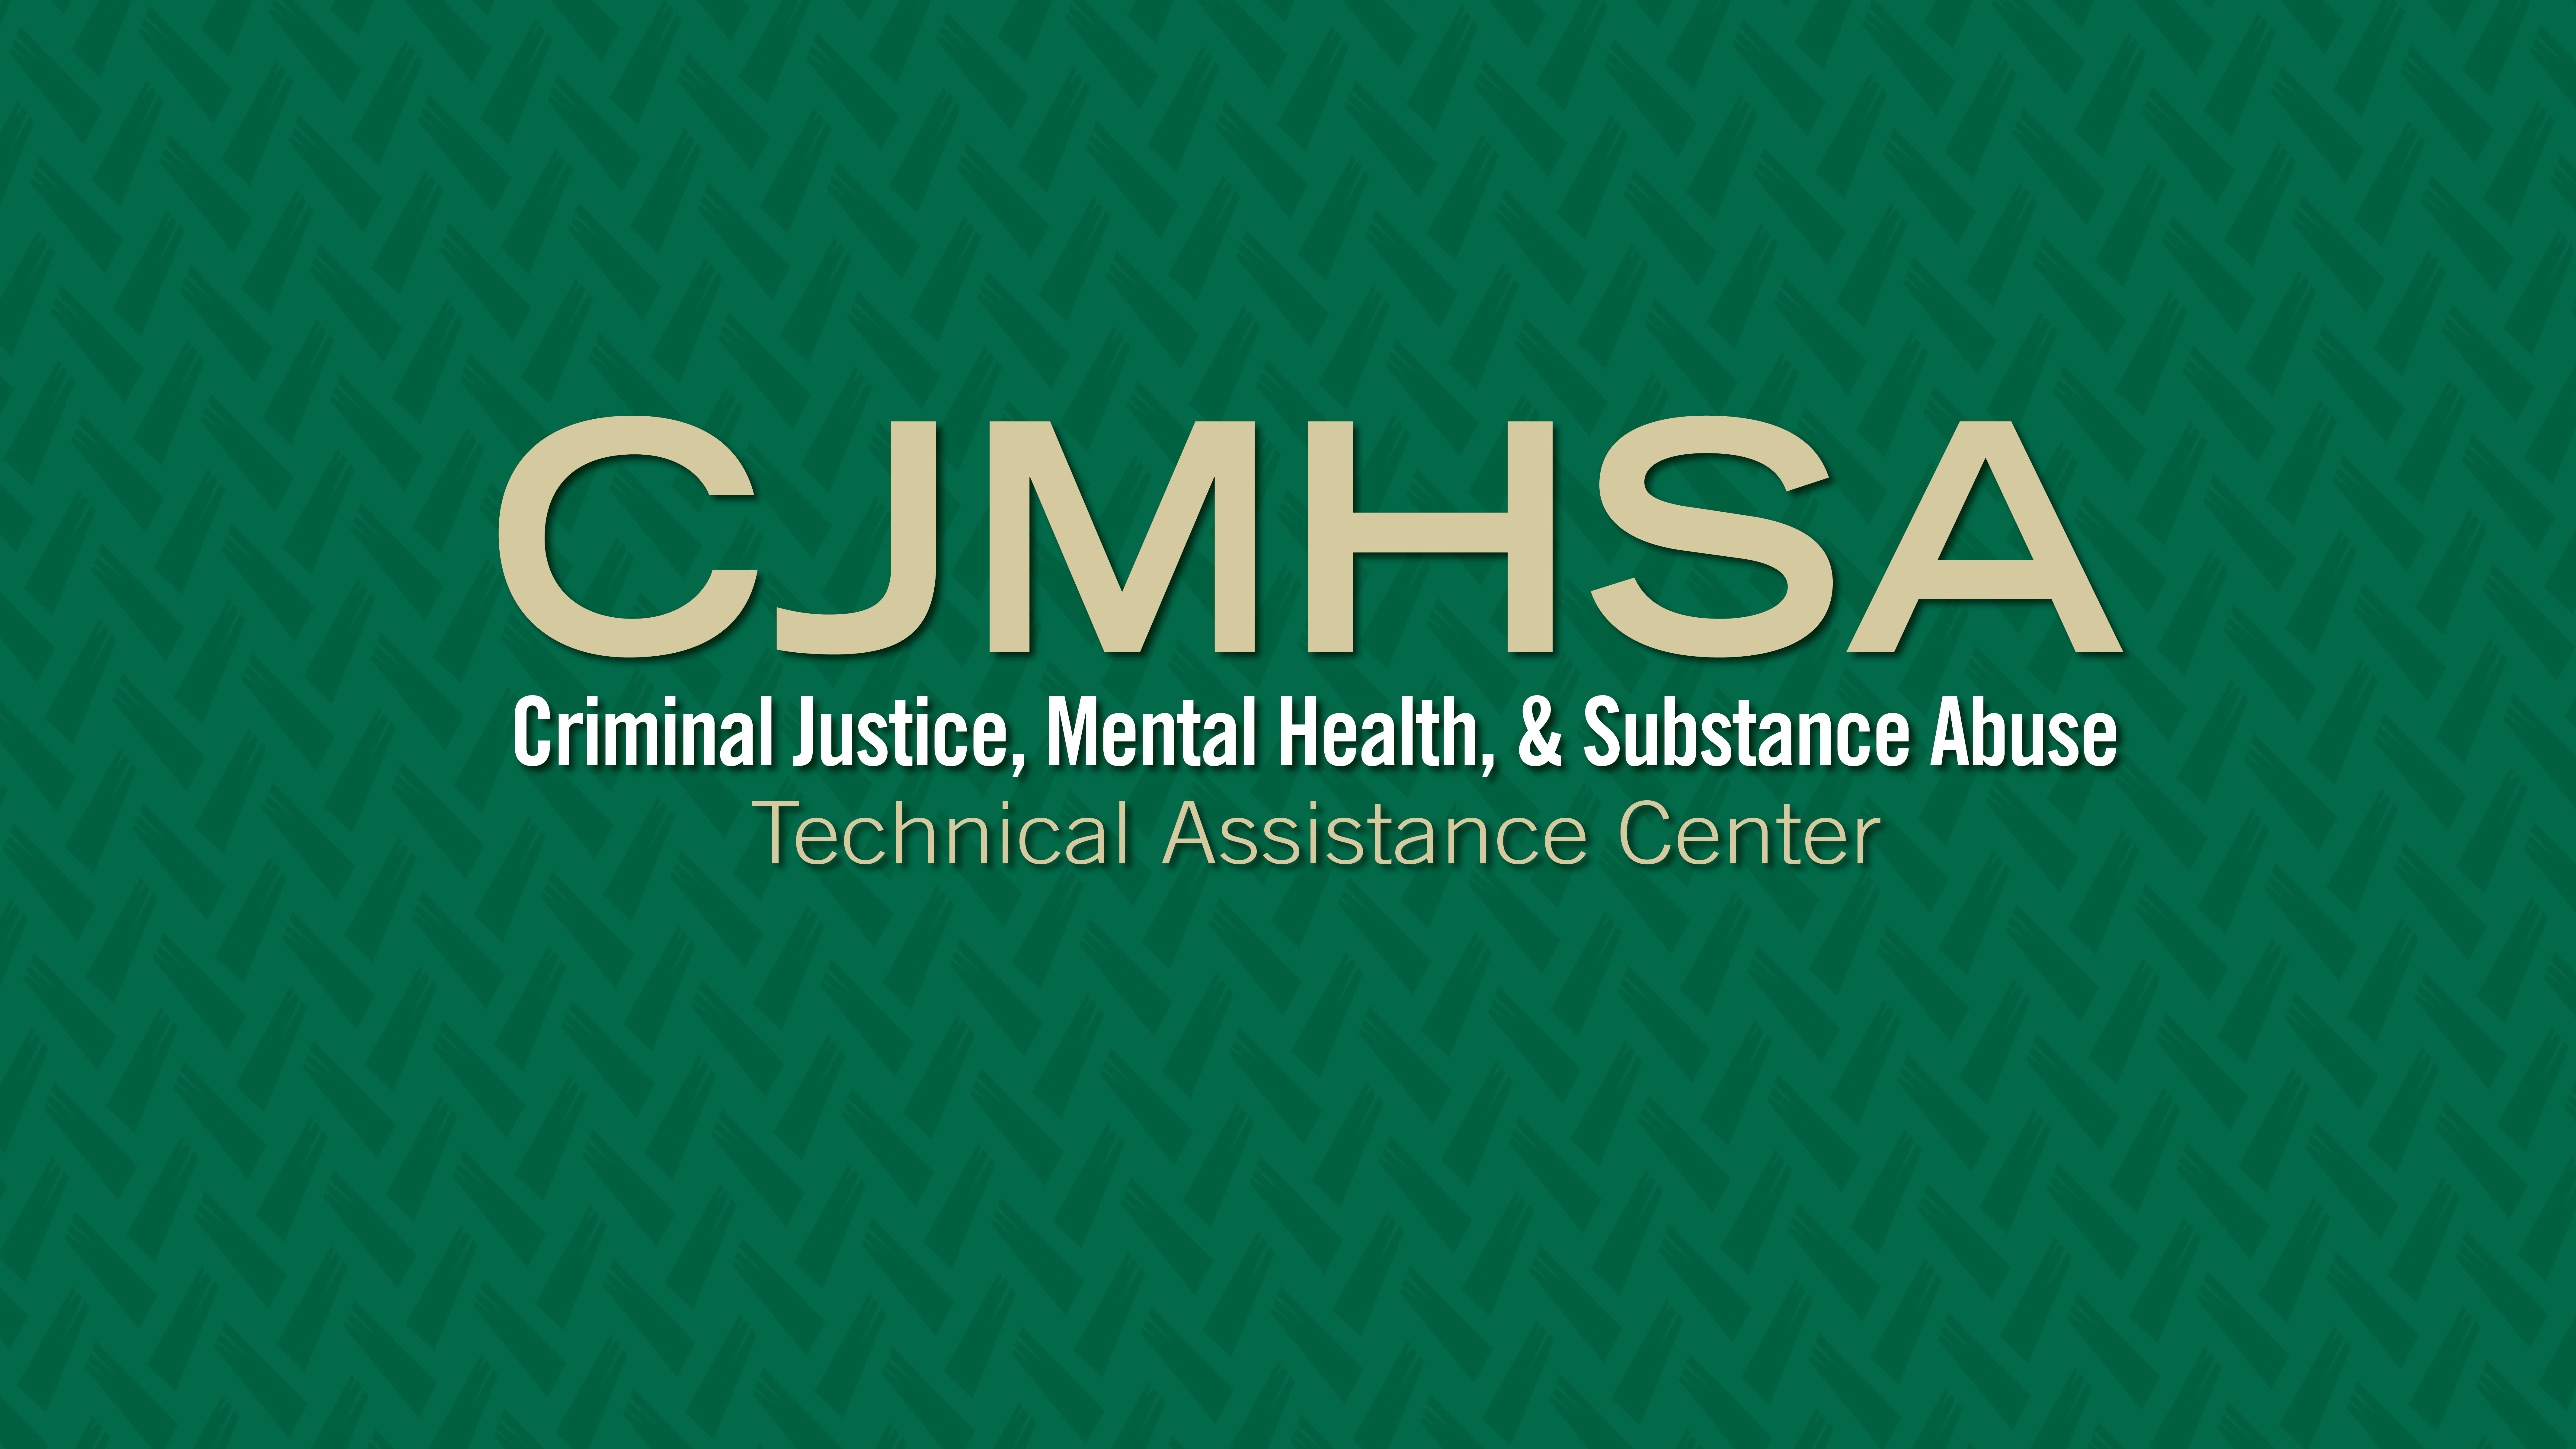 This image is the logo of USF's Criminal Justice, Mental Health, and Substance Abuse Technical Assistance Center.